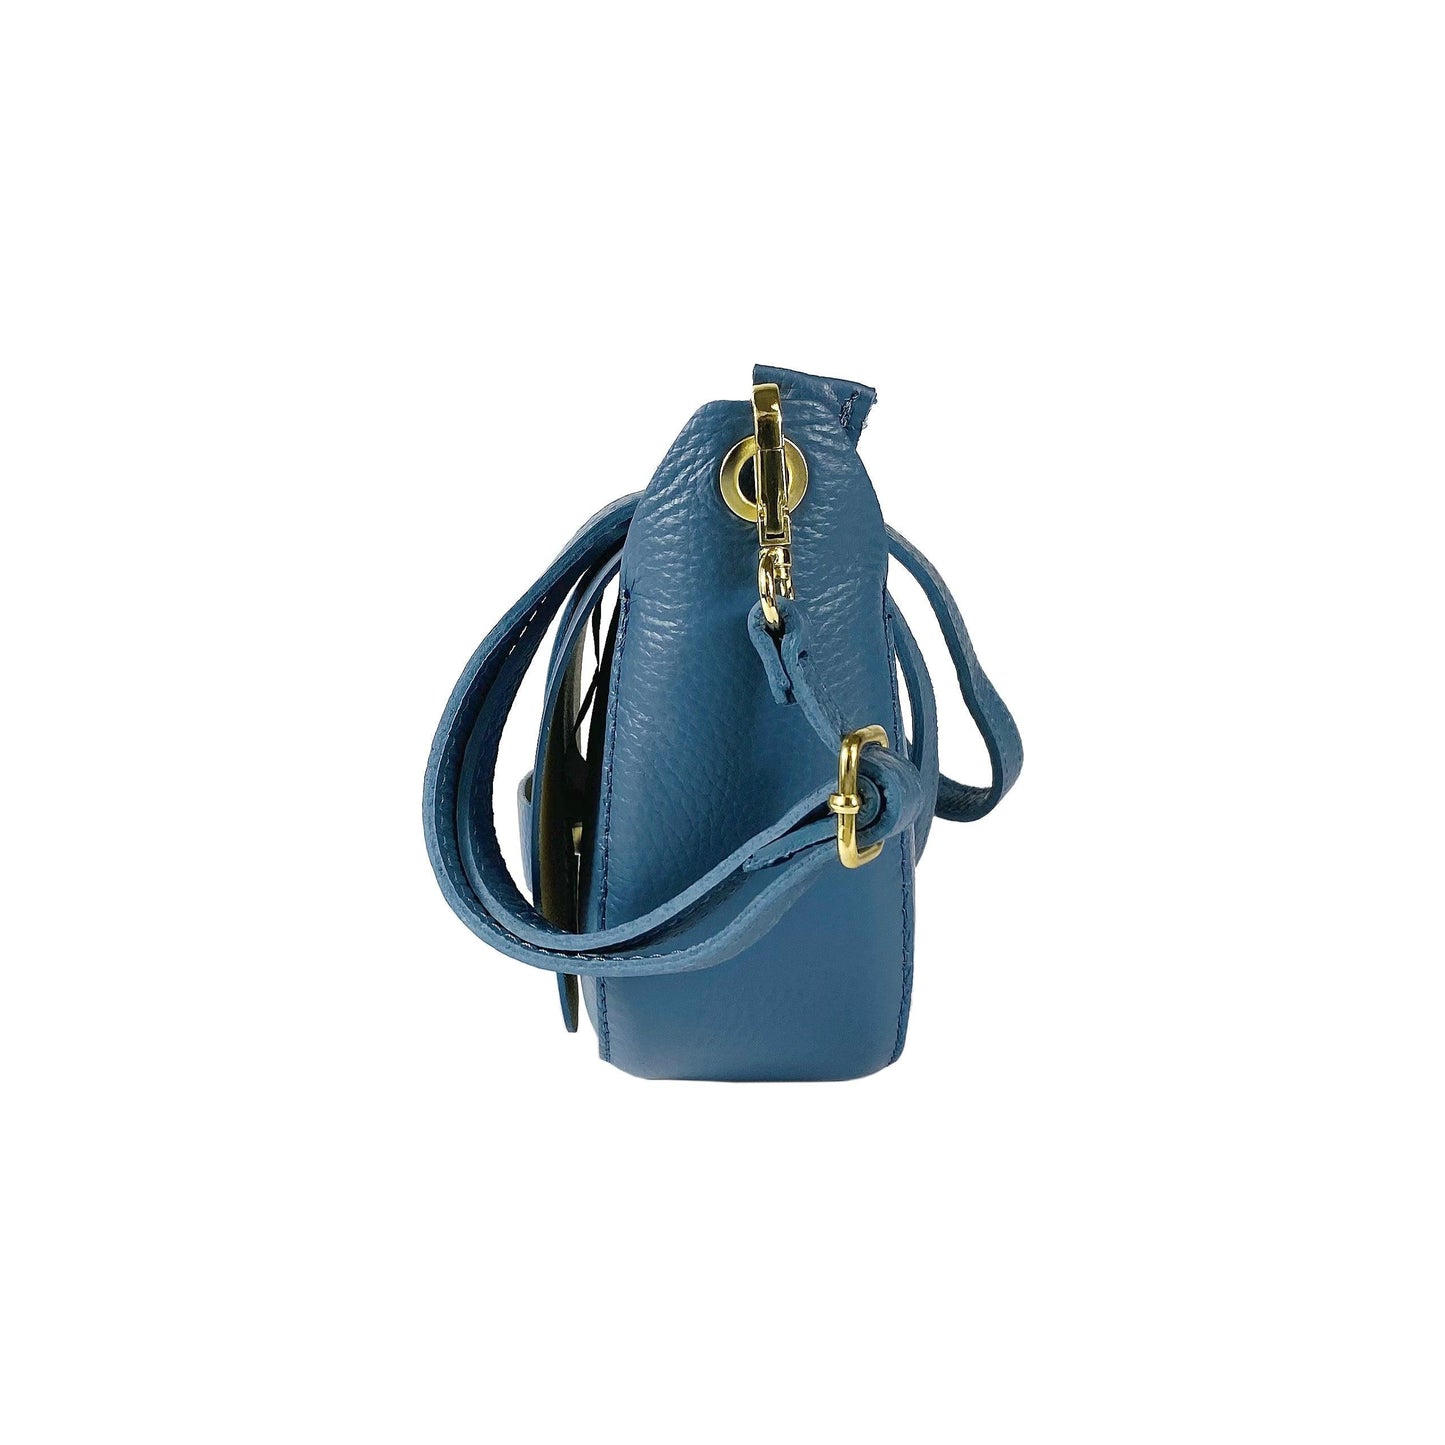 RB1010P | Women's Shoulder Bag in Genuine Leather | 21 x 17 x 8 cm-2